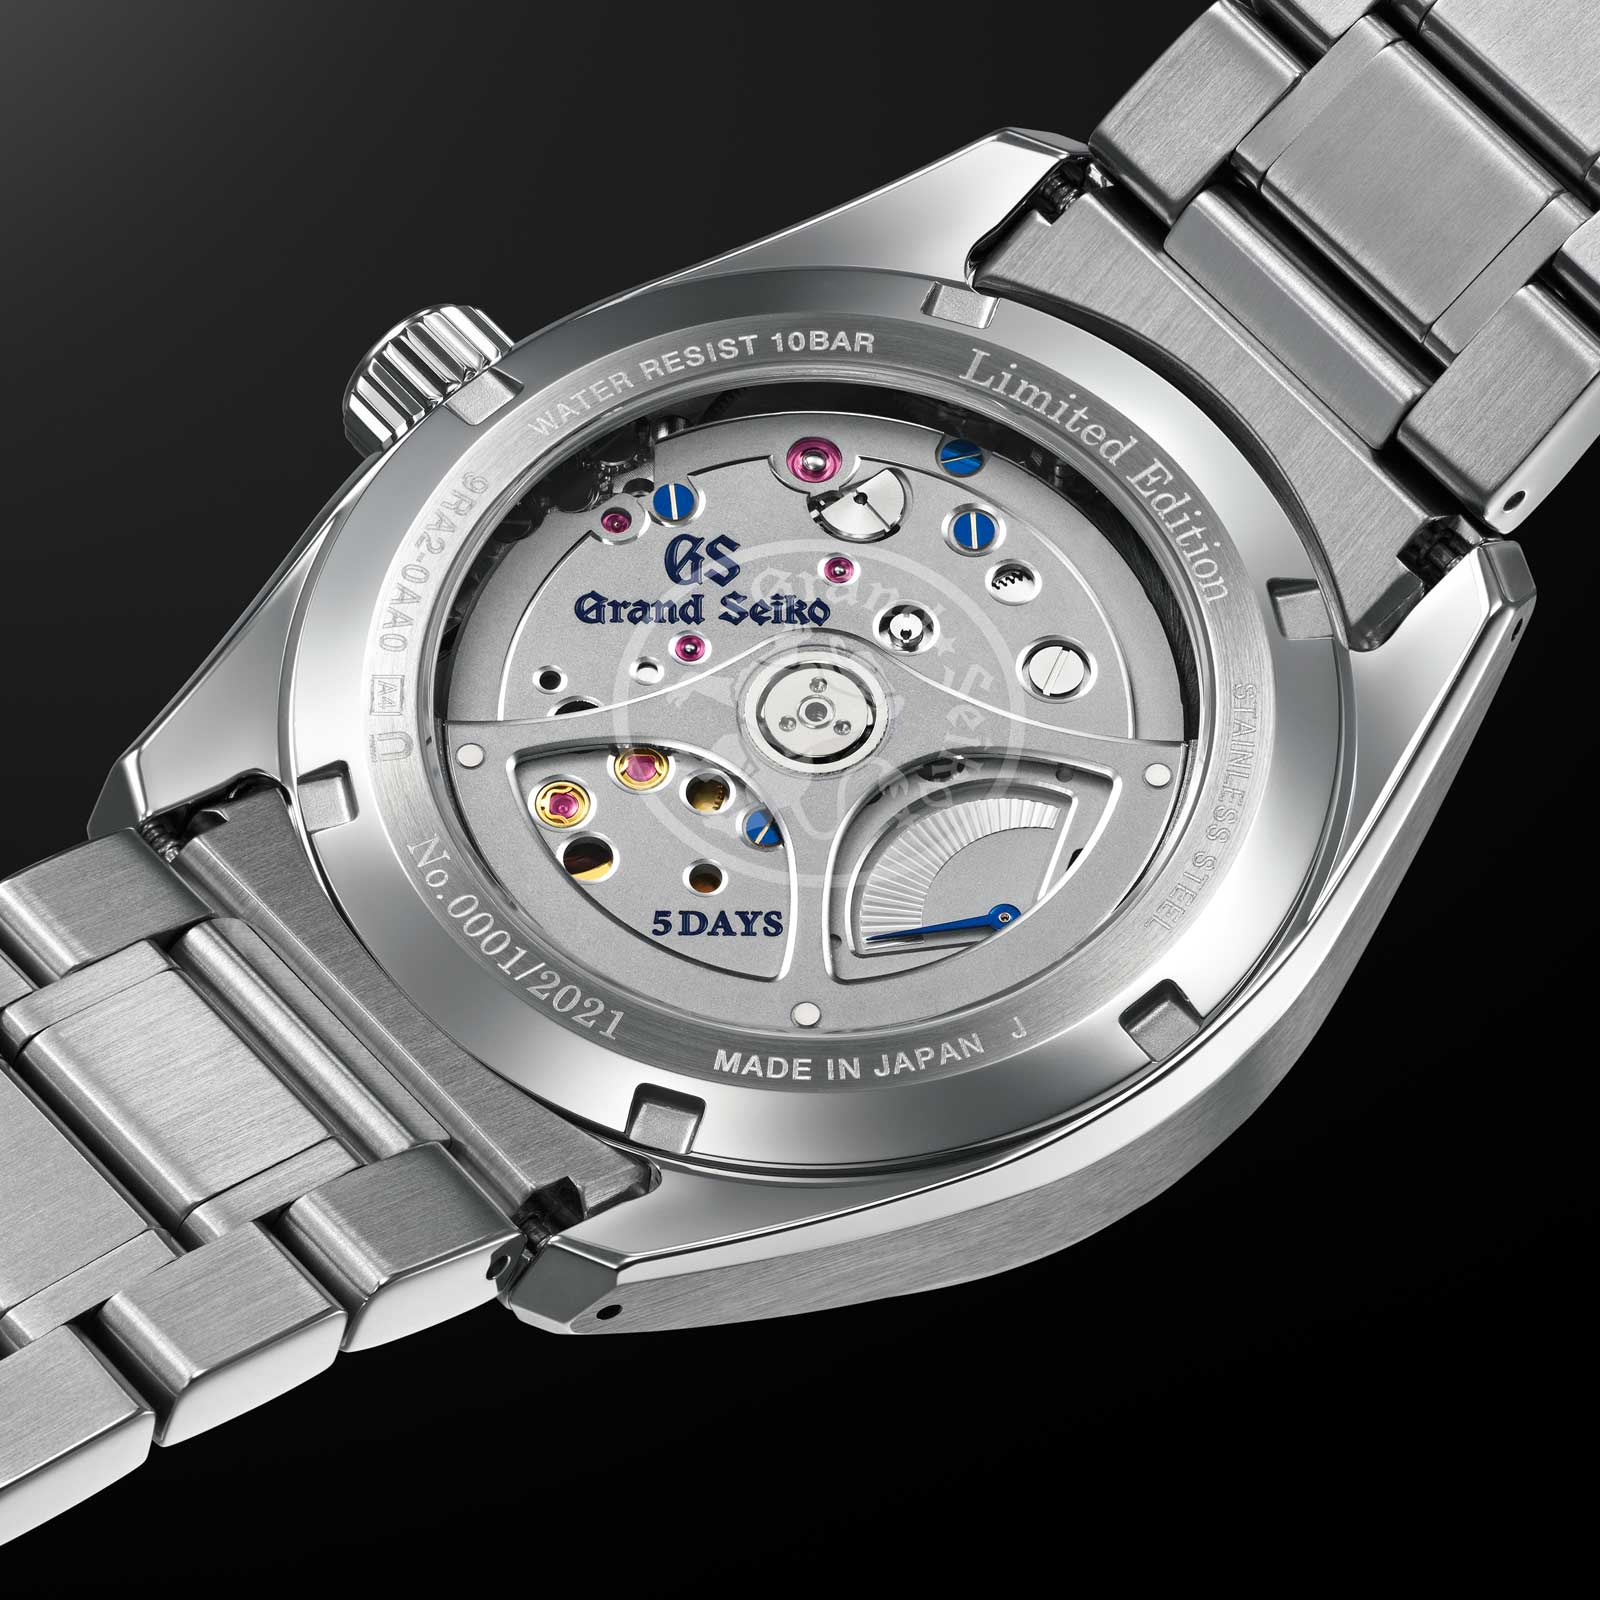 Grand Seiko Spring Drive 5 Days 9RA2 Caliber with power reserve indicator on the movement side of the watch.